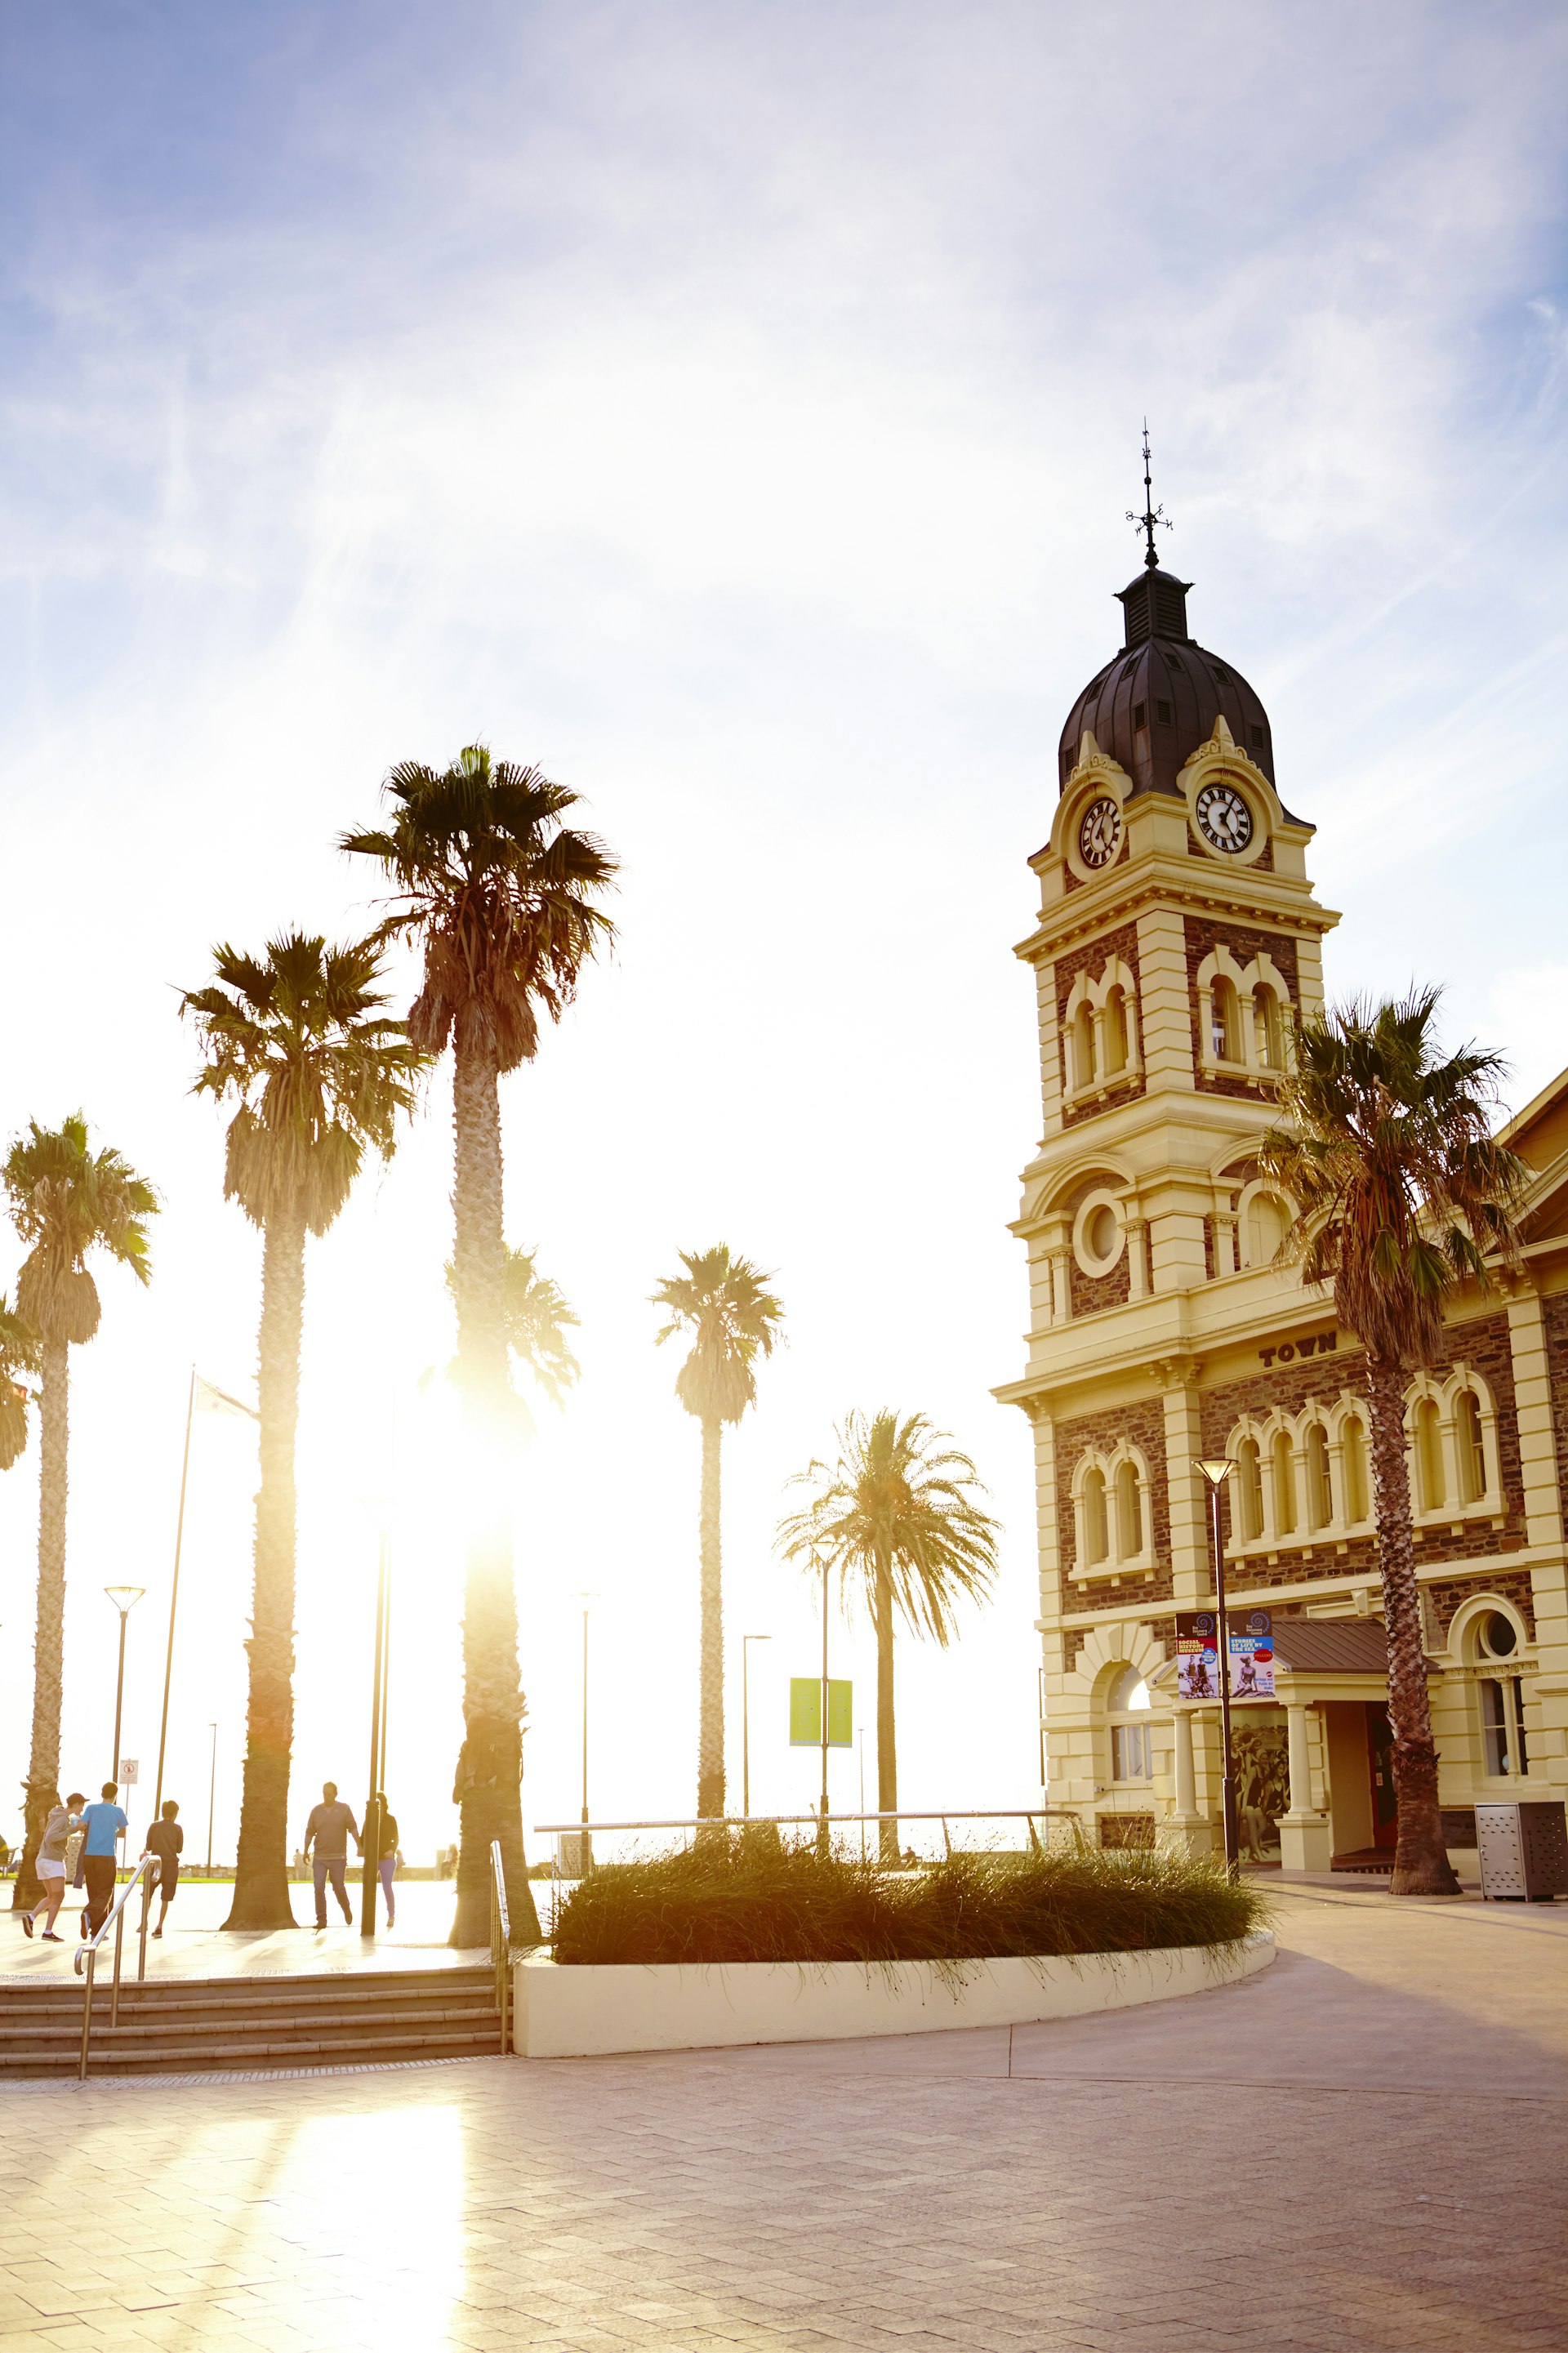 Features - Glenelg town hall.